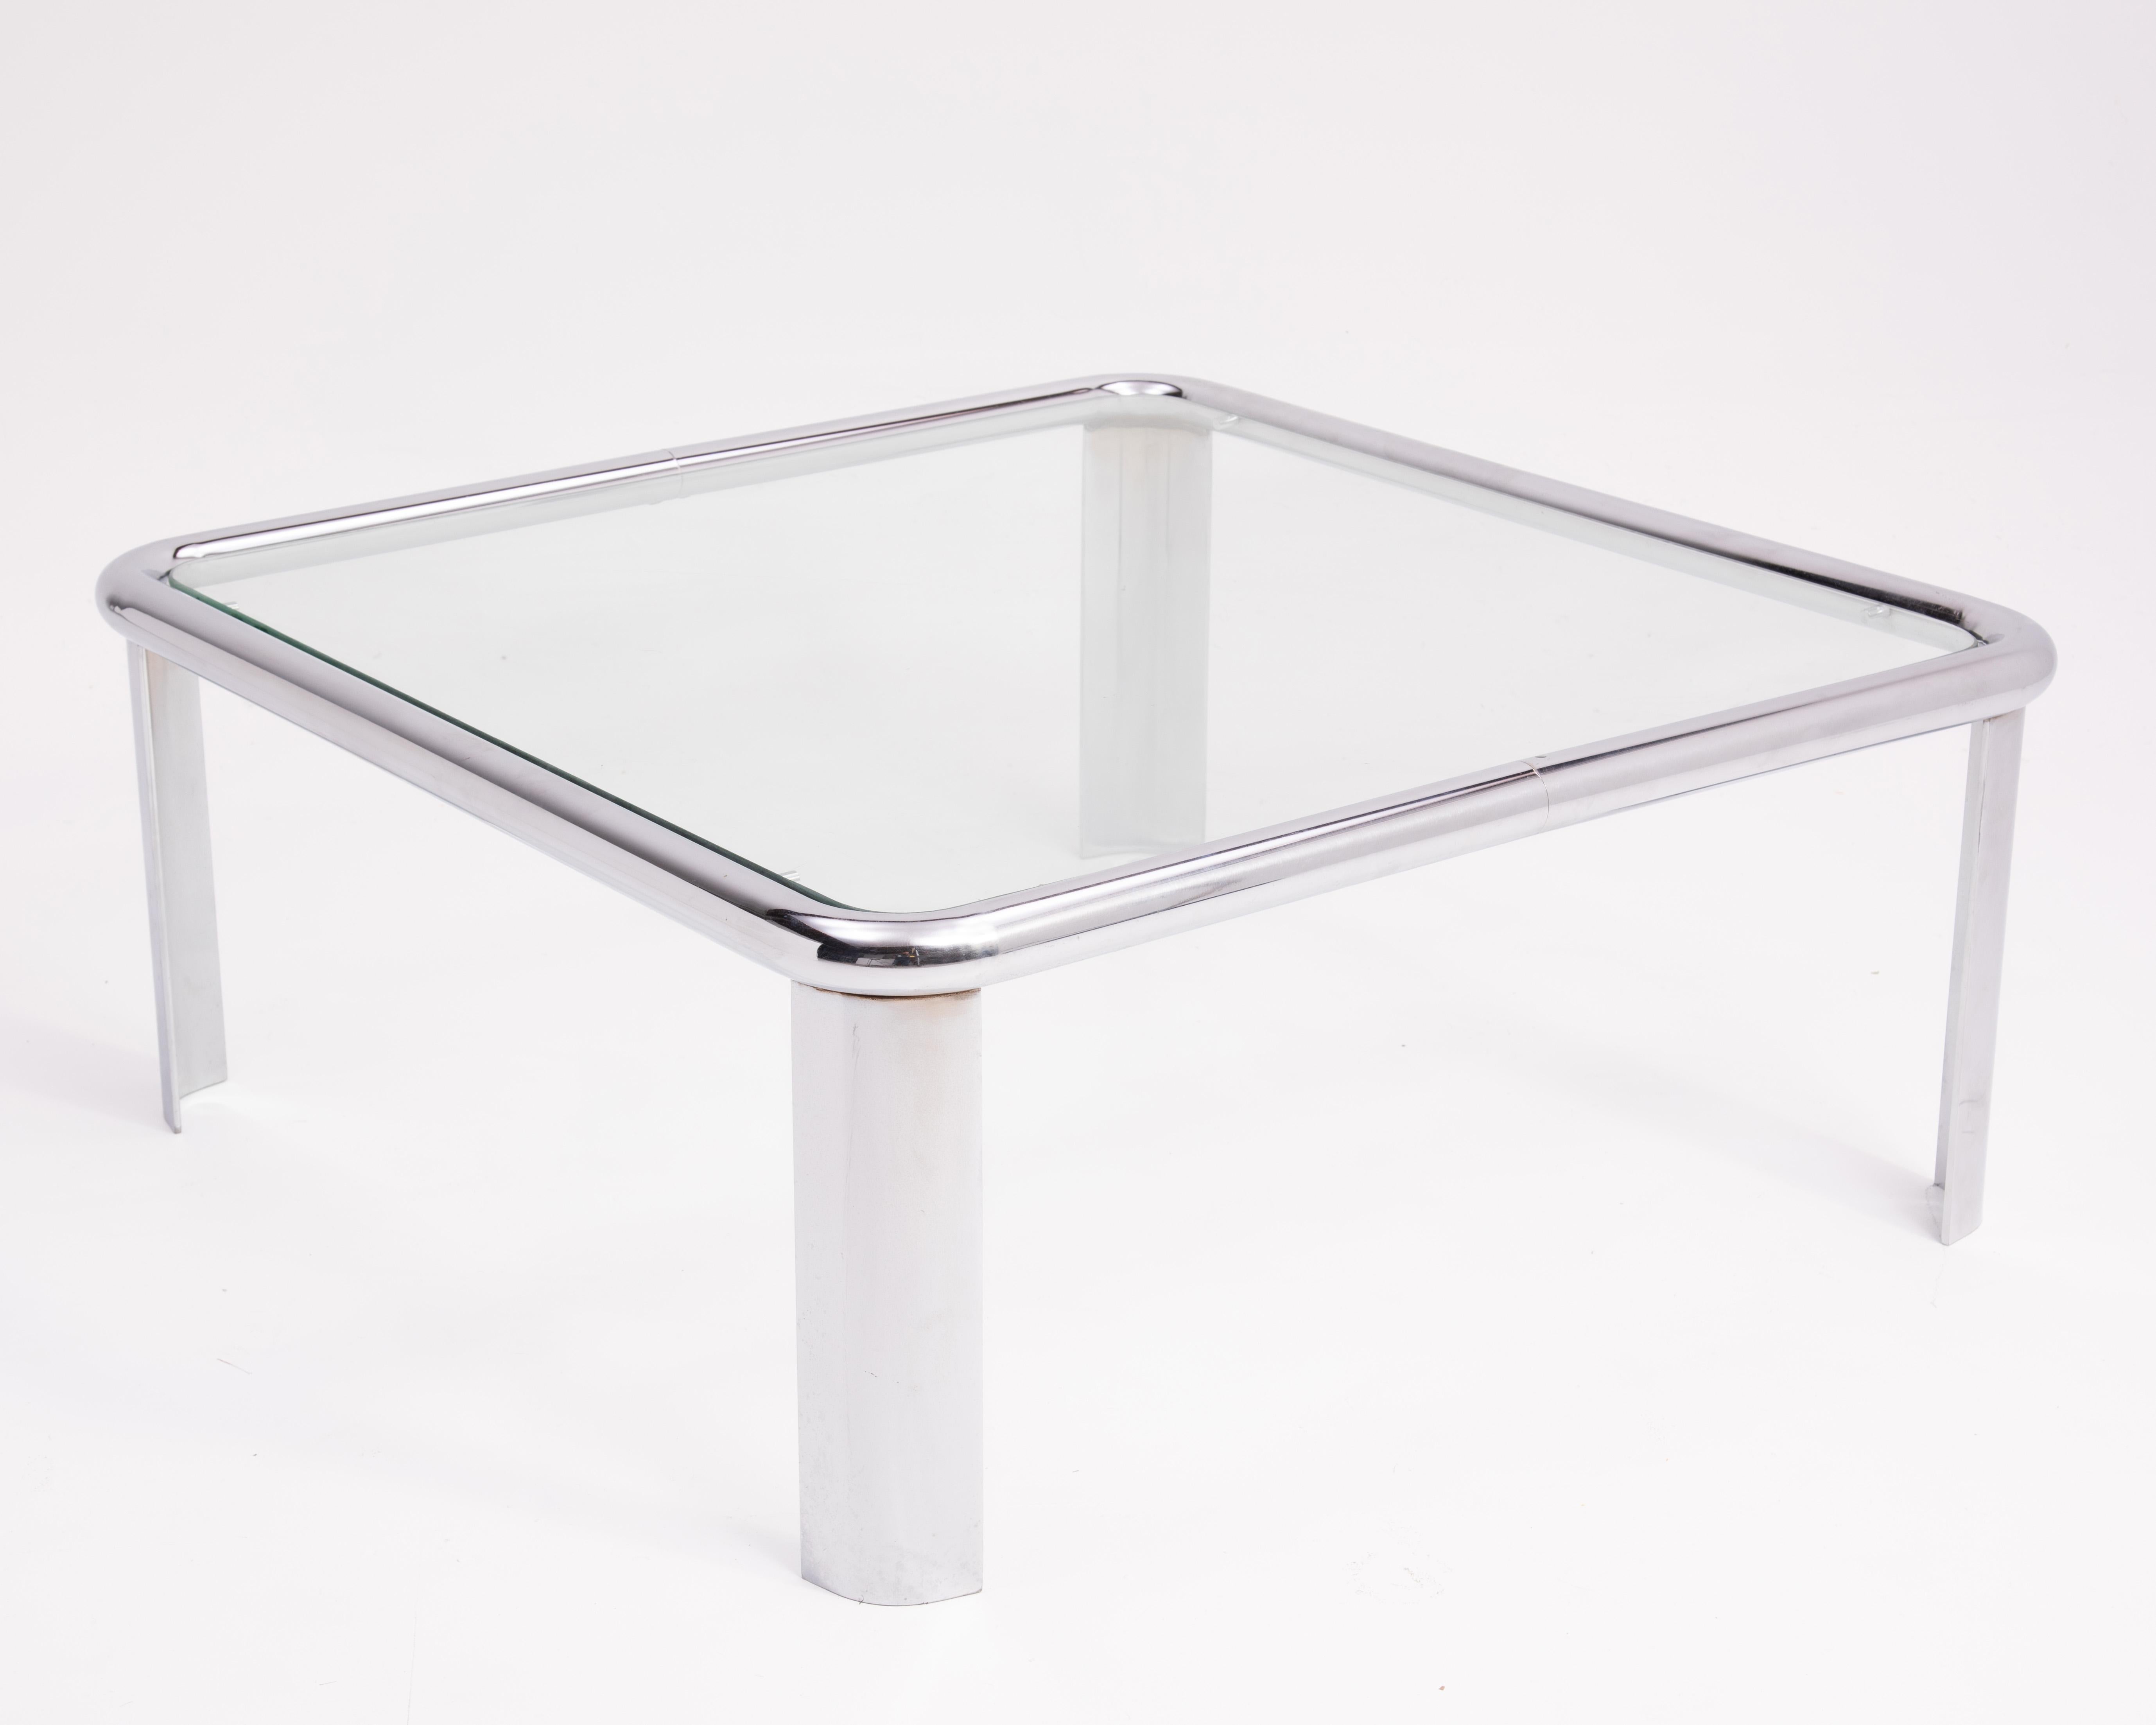 A 1970s tubular steel and glass coffee table in the style of the John Mascheroni 